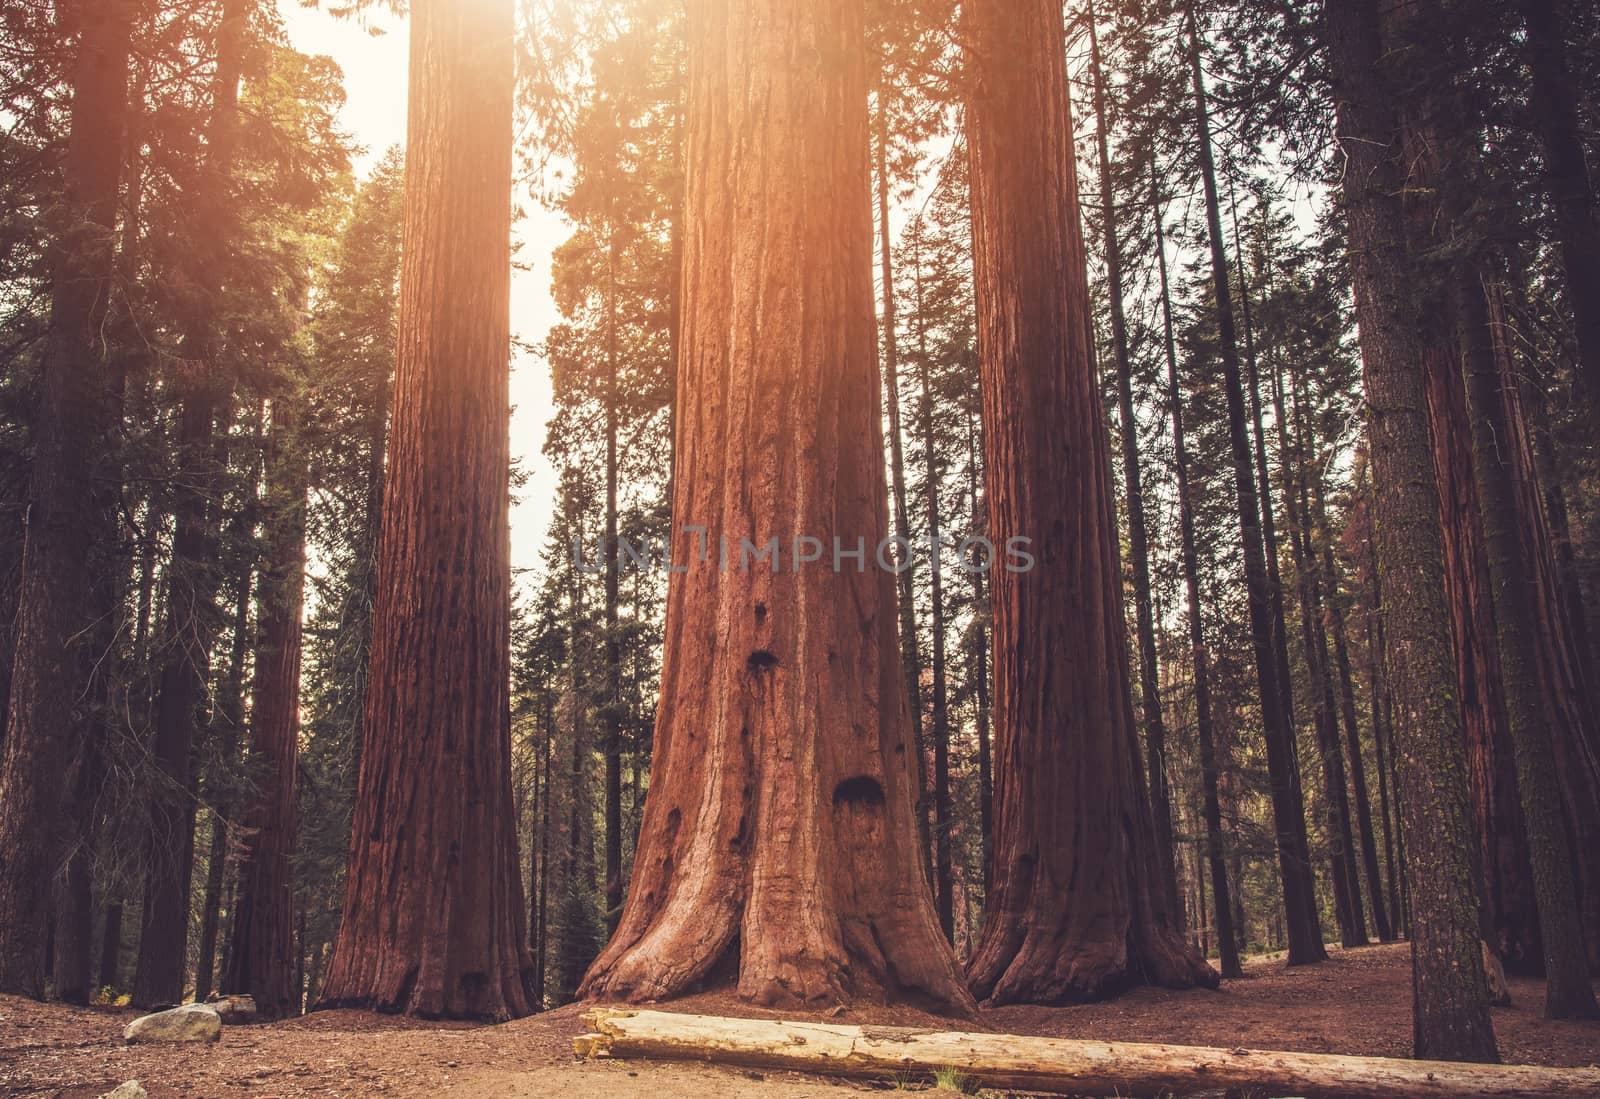 Ancient Sequoias Woodland by welcomia